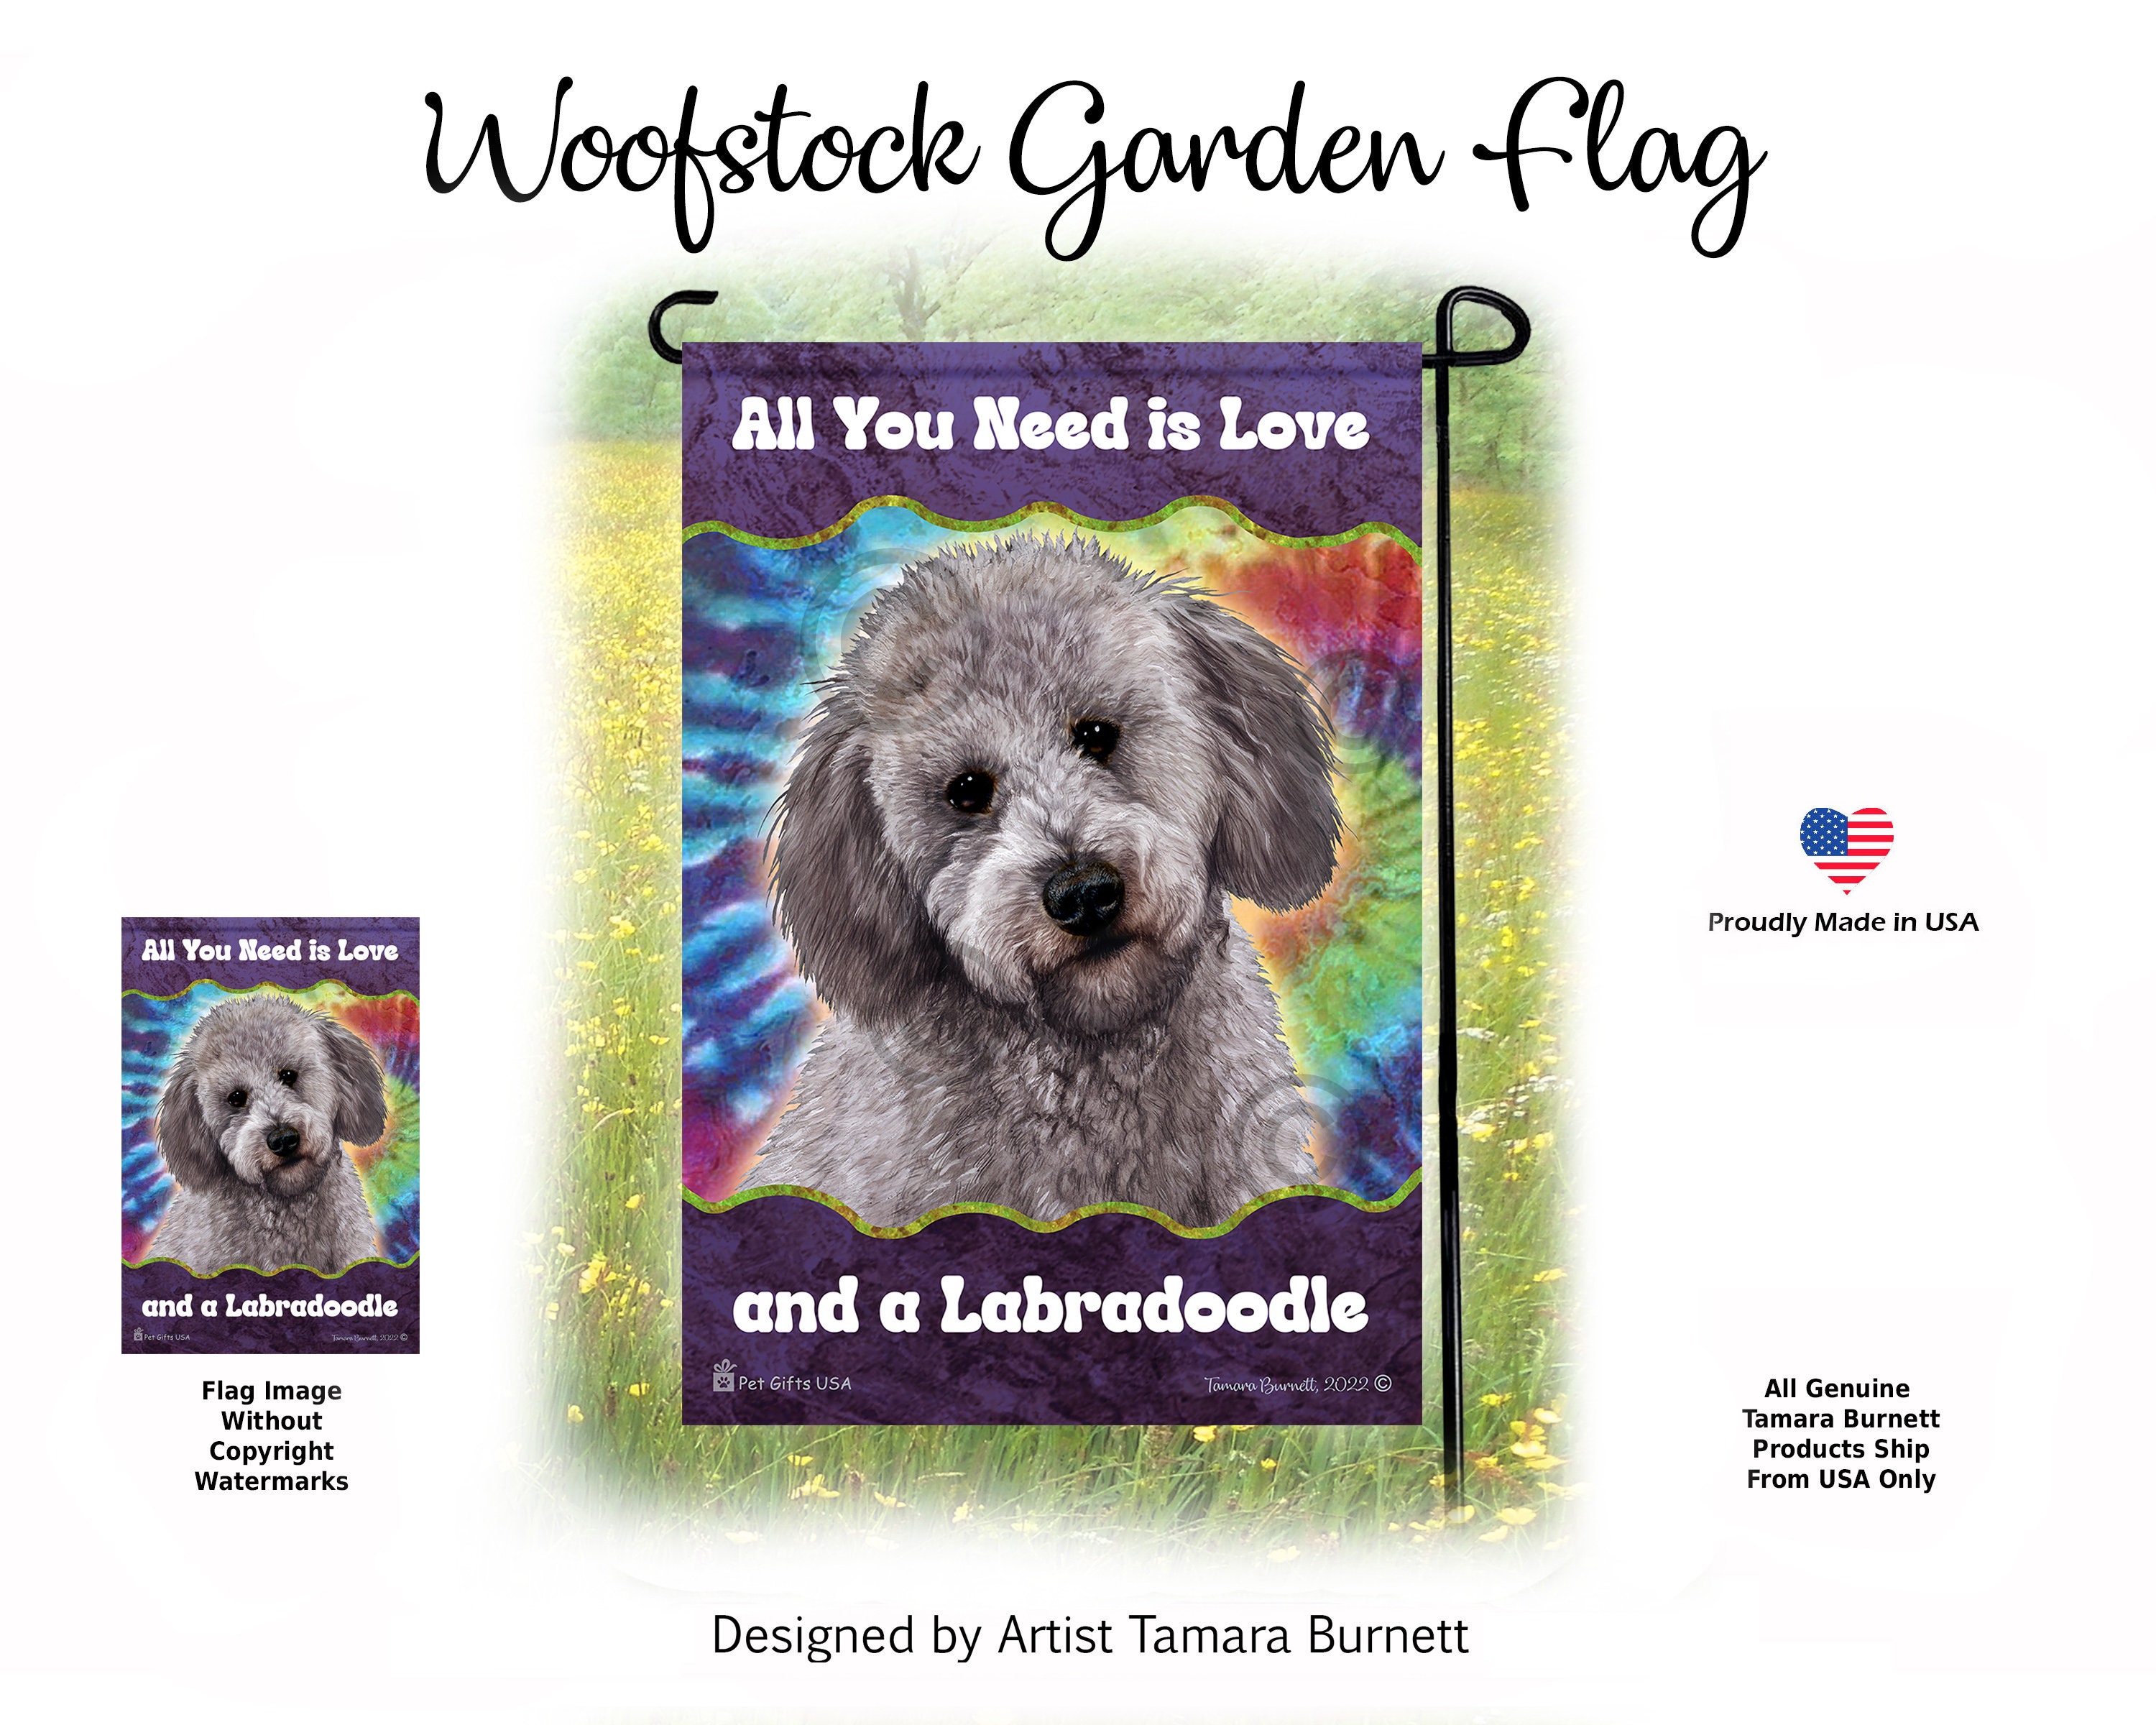 All You Need is Love and a Labradoodle Grey Poodle